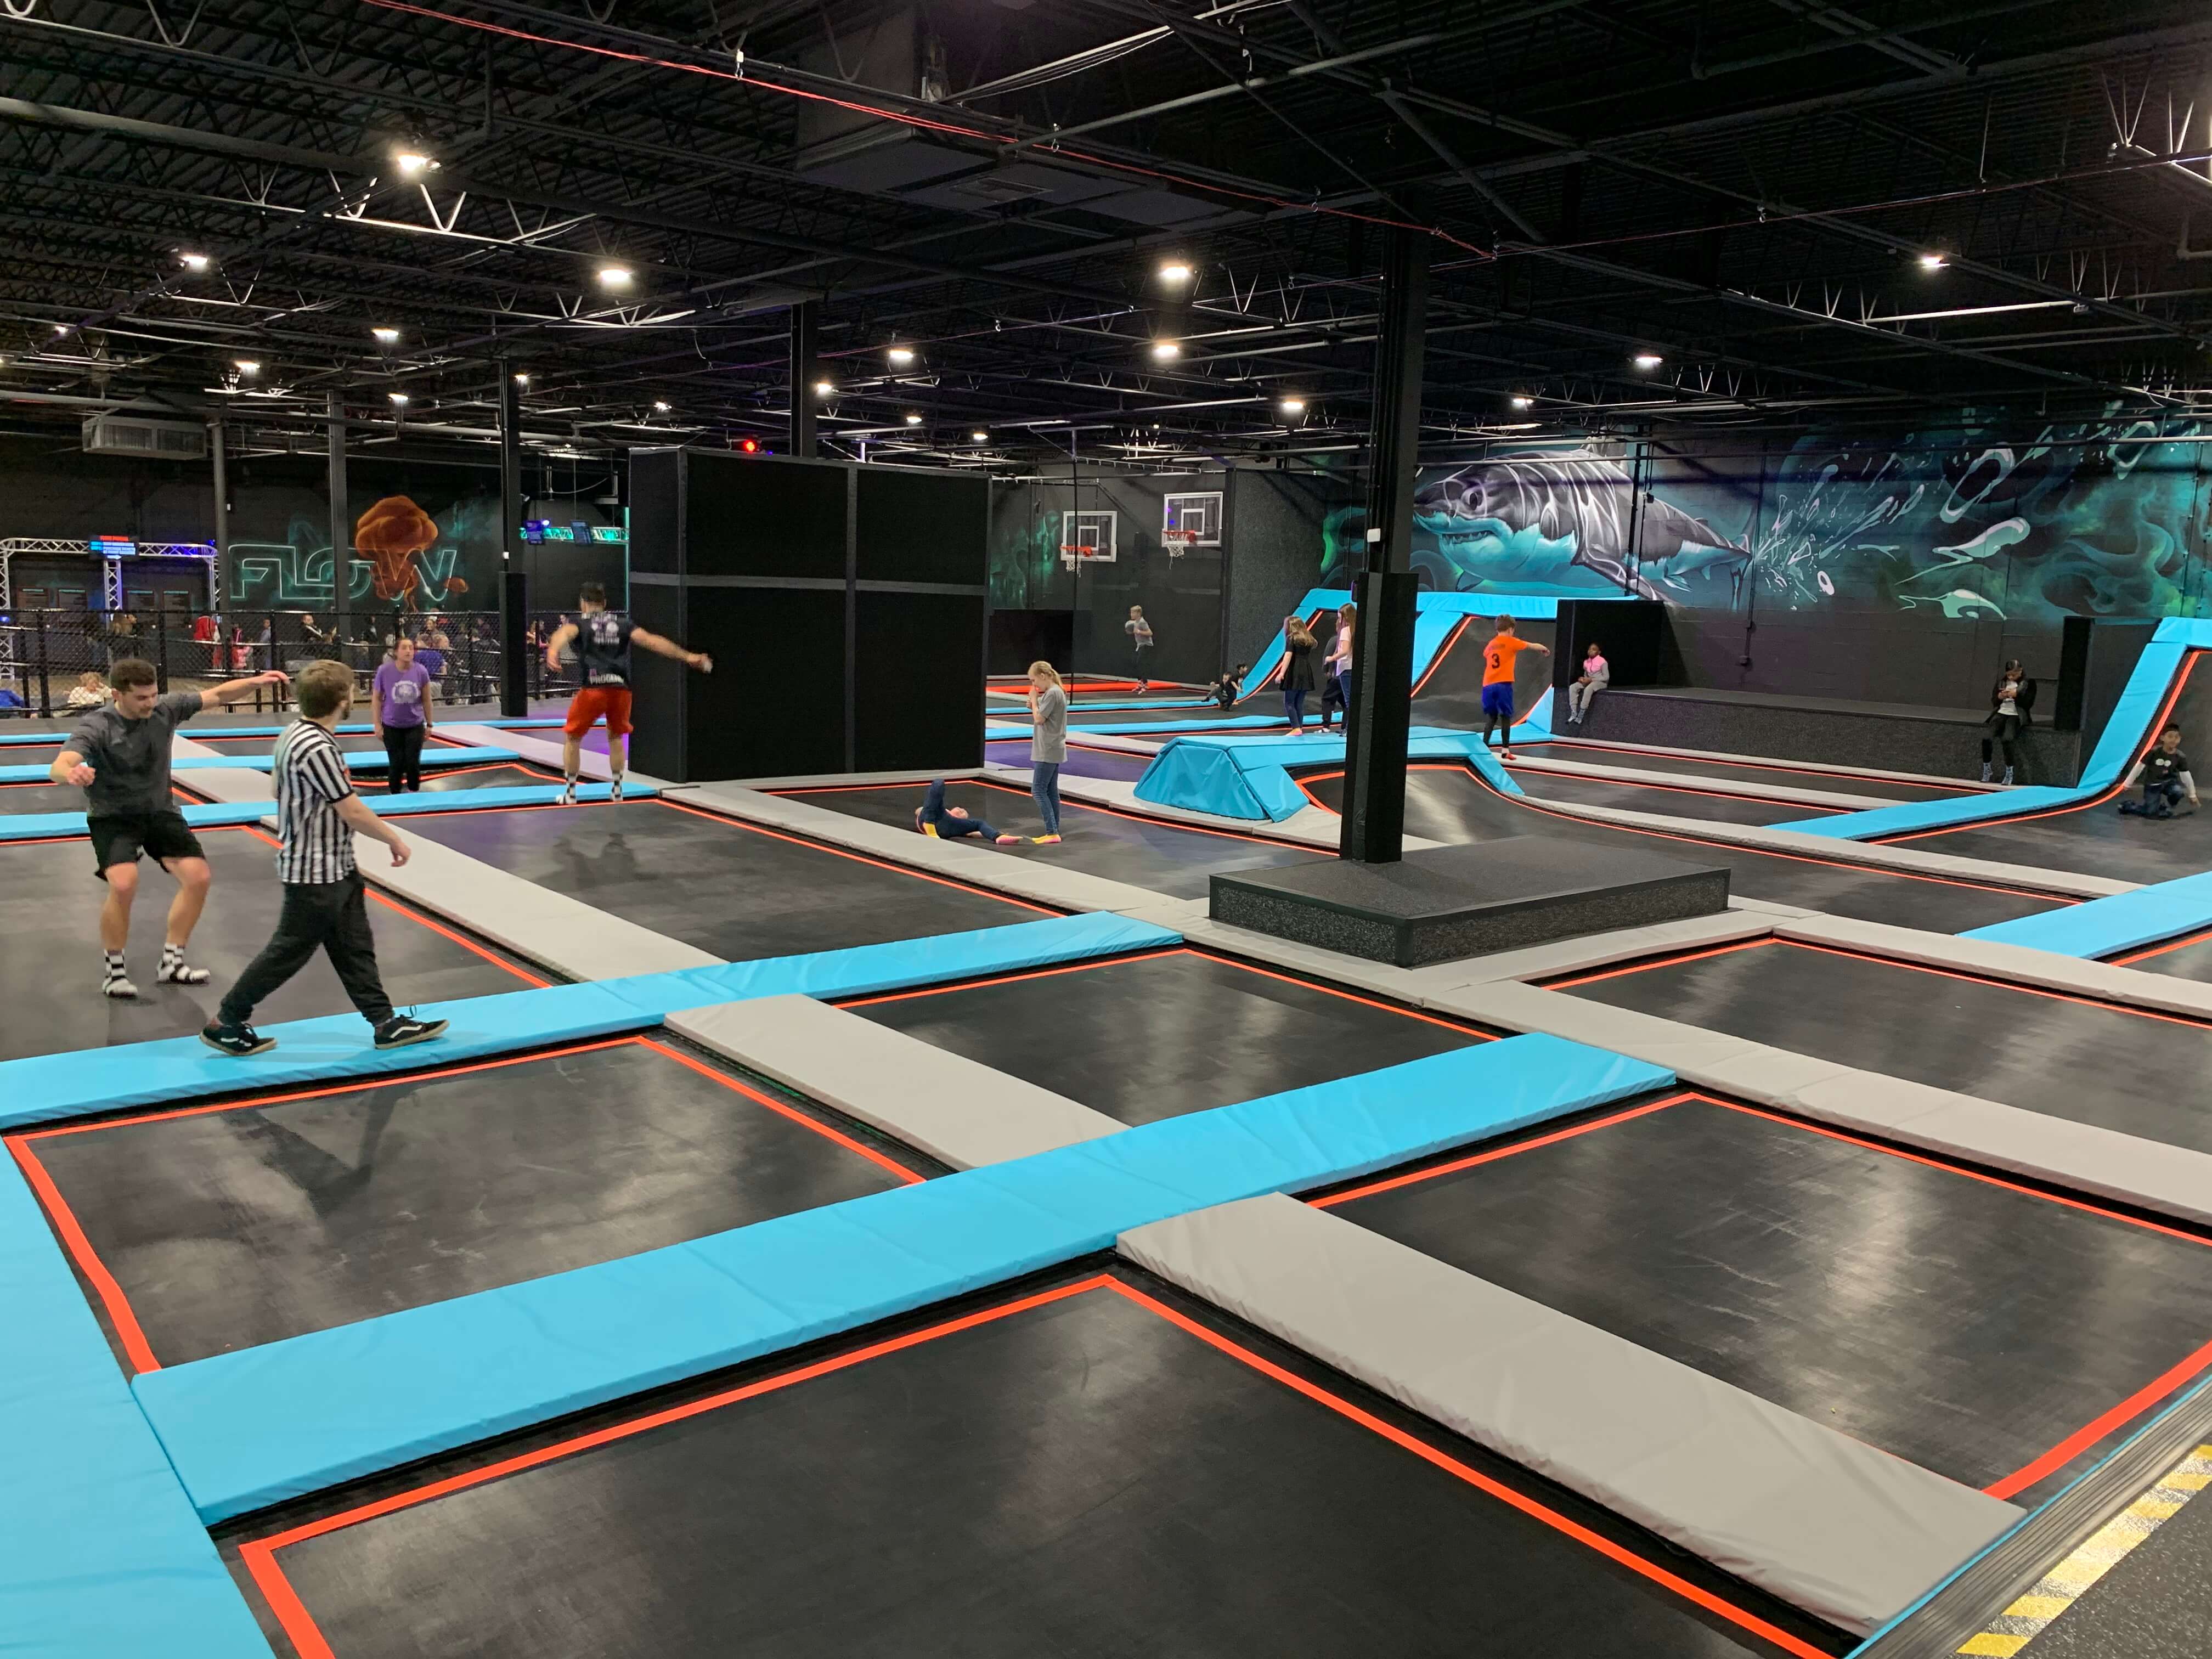 Trampoline Open Jump and Birthday Party Places - Great Jump Sports added  a - Trampoline Open Jump and Birthday Party Places - Great Jump Sports